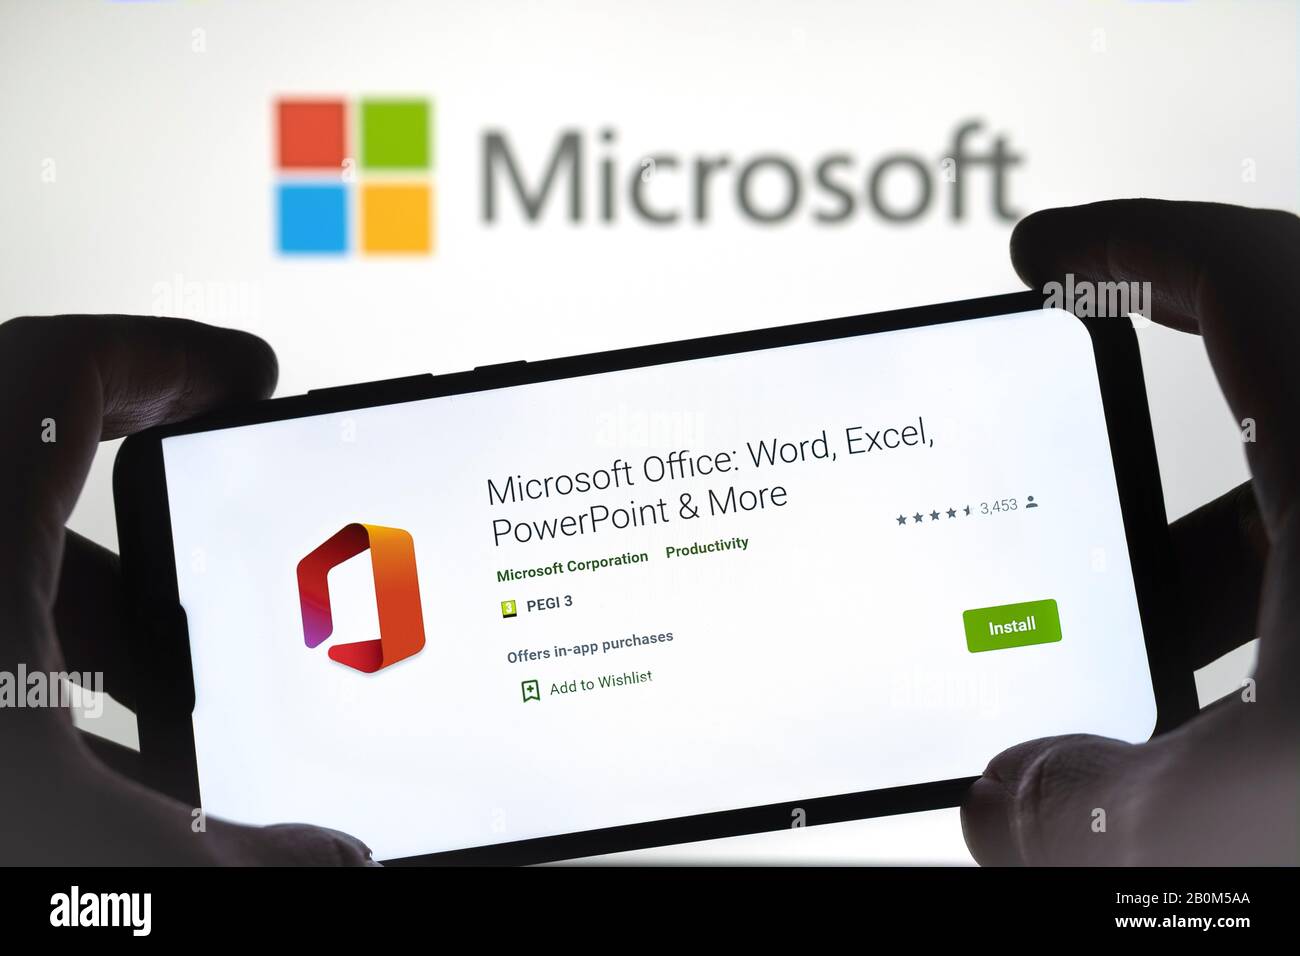 MS Office app on the smartphone hold in hands and Microsoft logo on the blurred background. Real photo, not a montage. Stock Photo